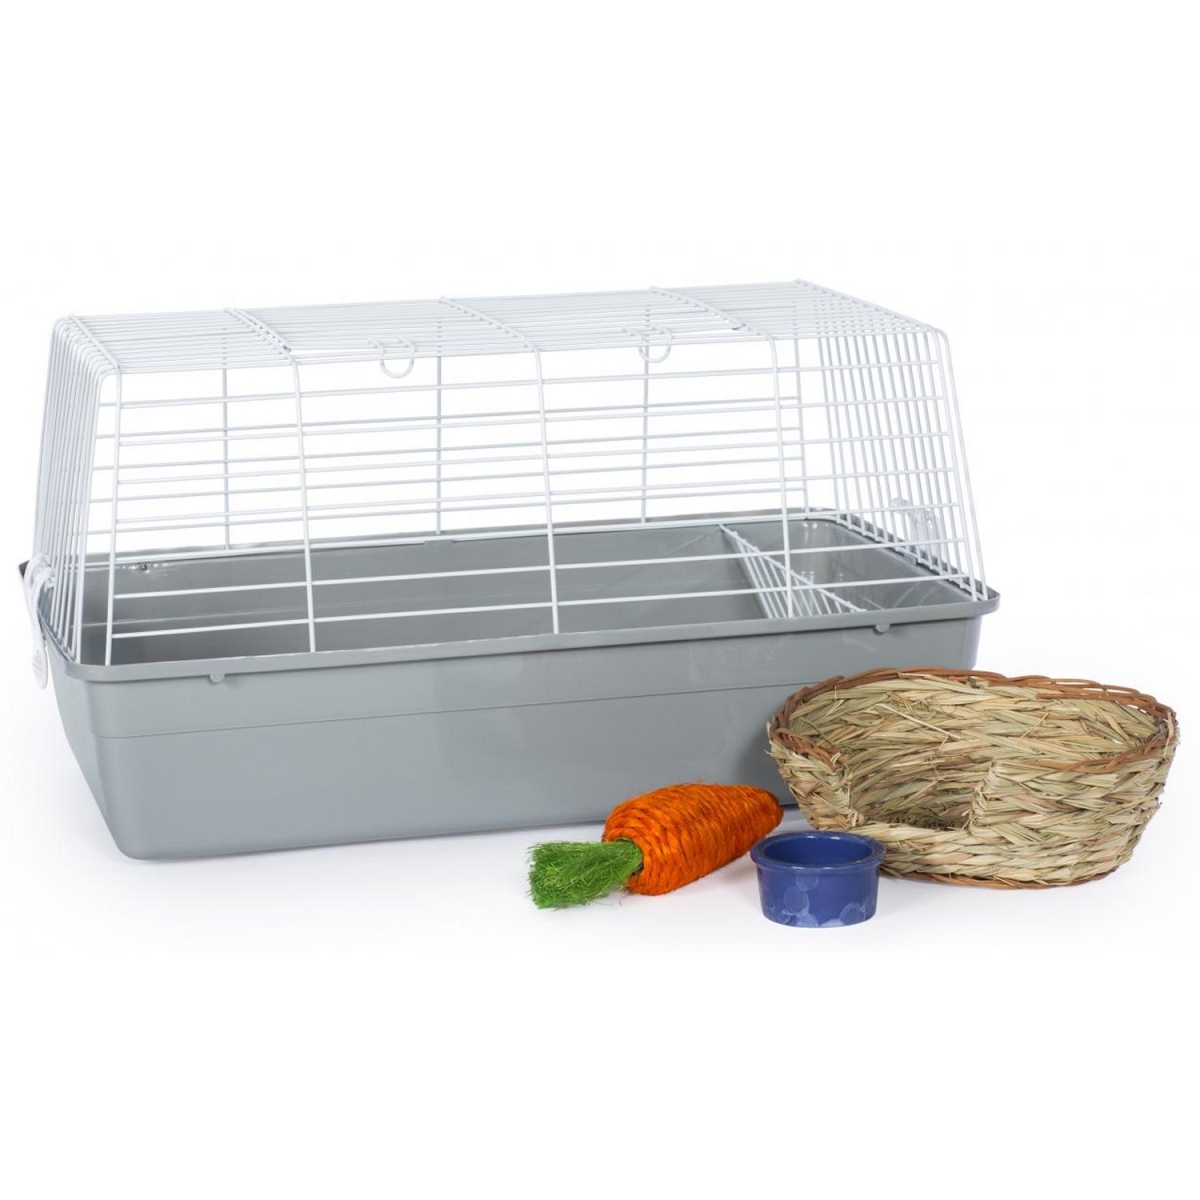 Picture of Prevue Pet Products PP-527-KIT Bella Rabbit Cage Kit - White & Grey - Medium